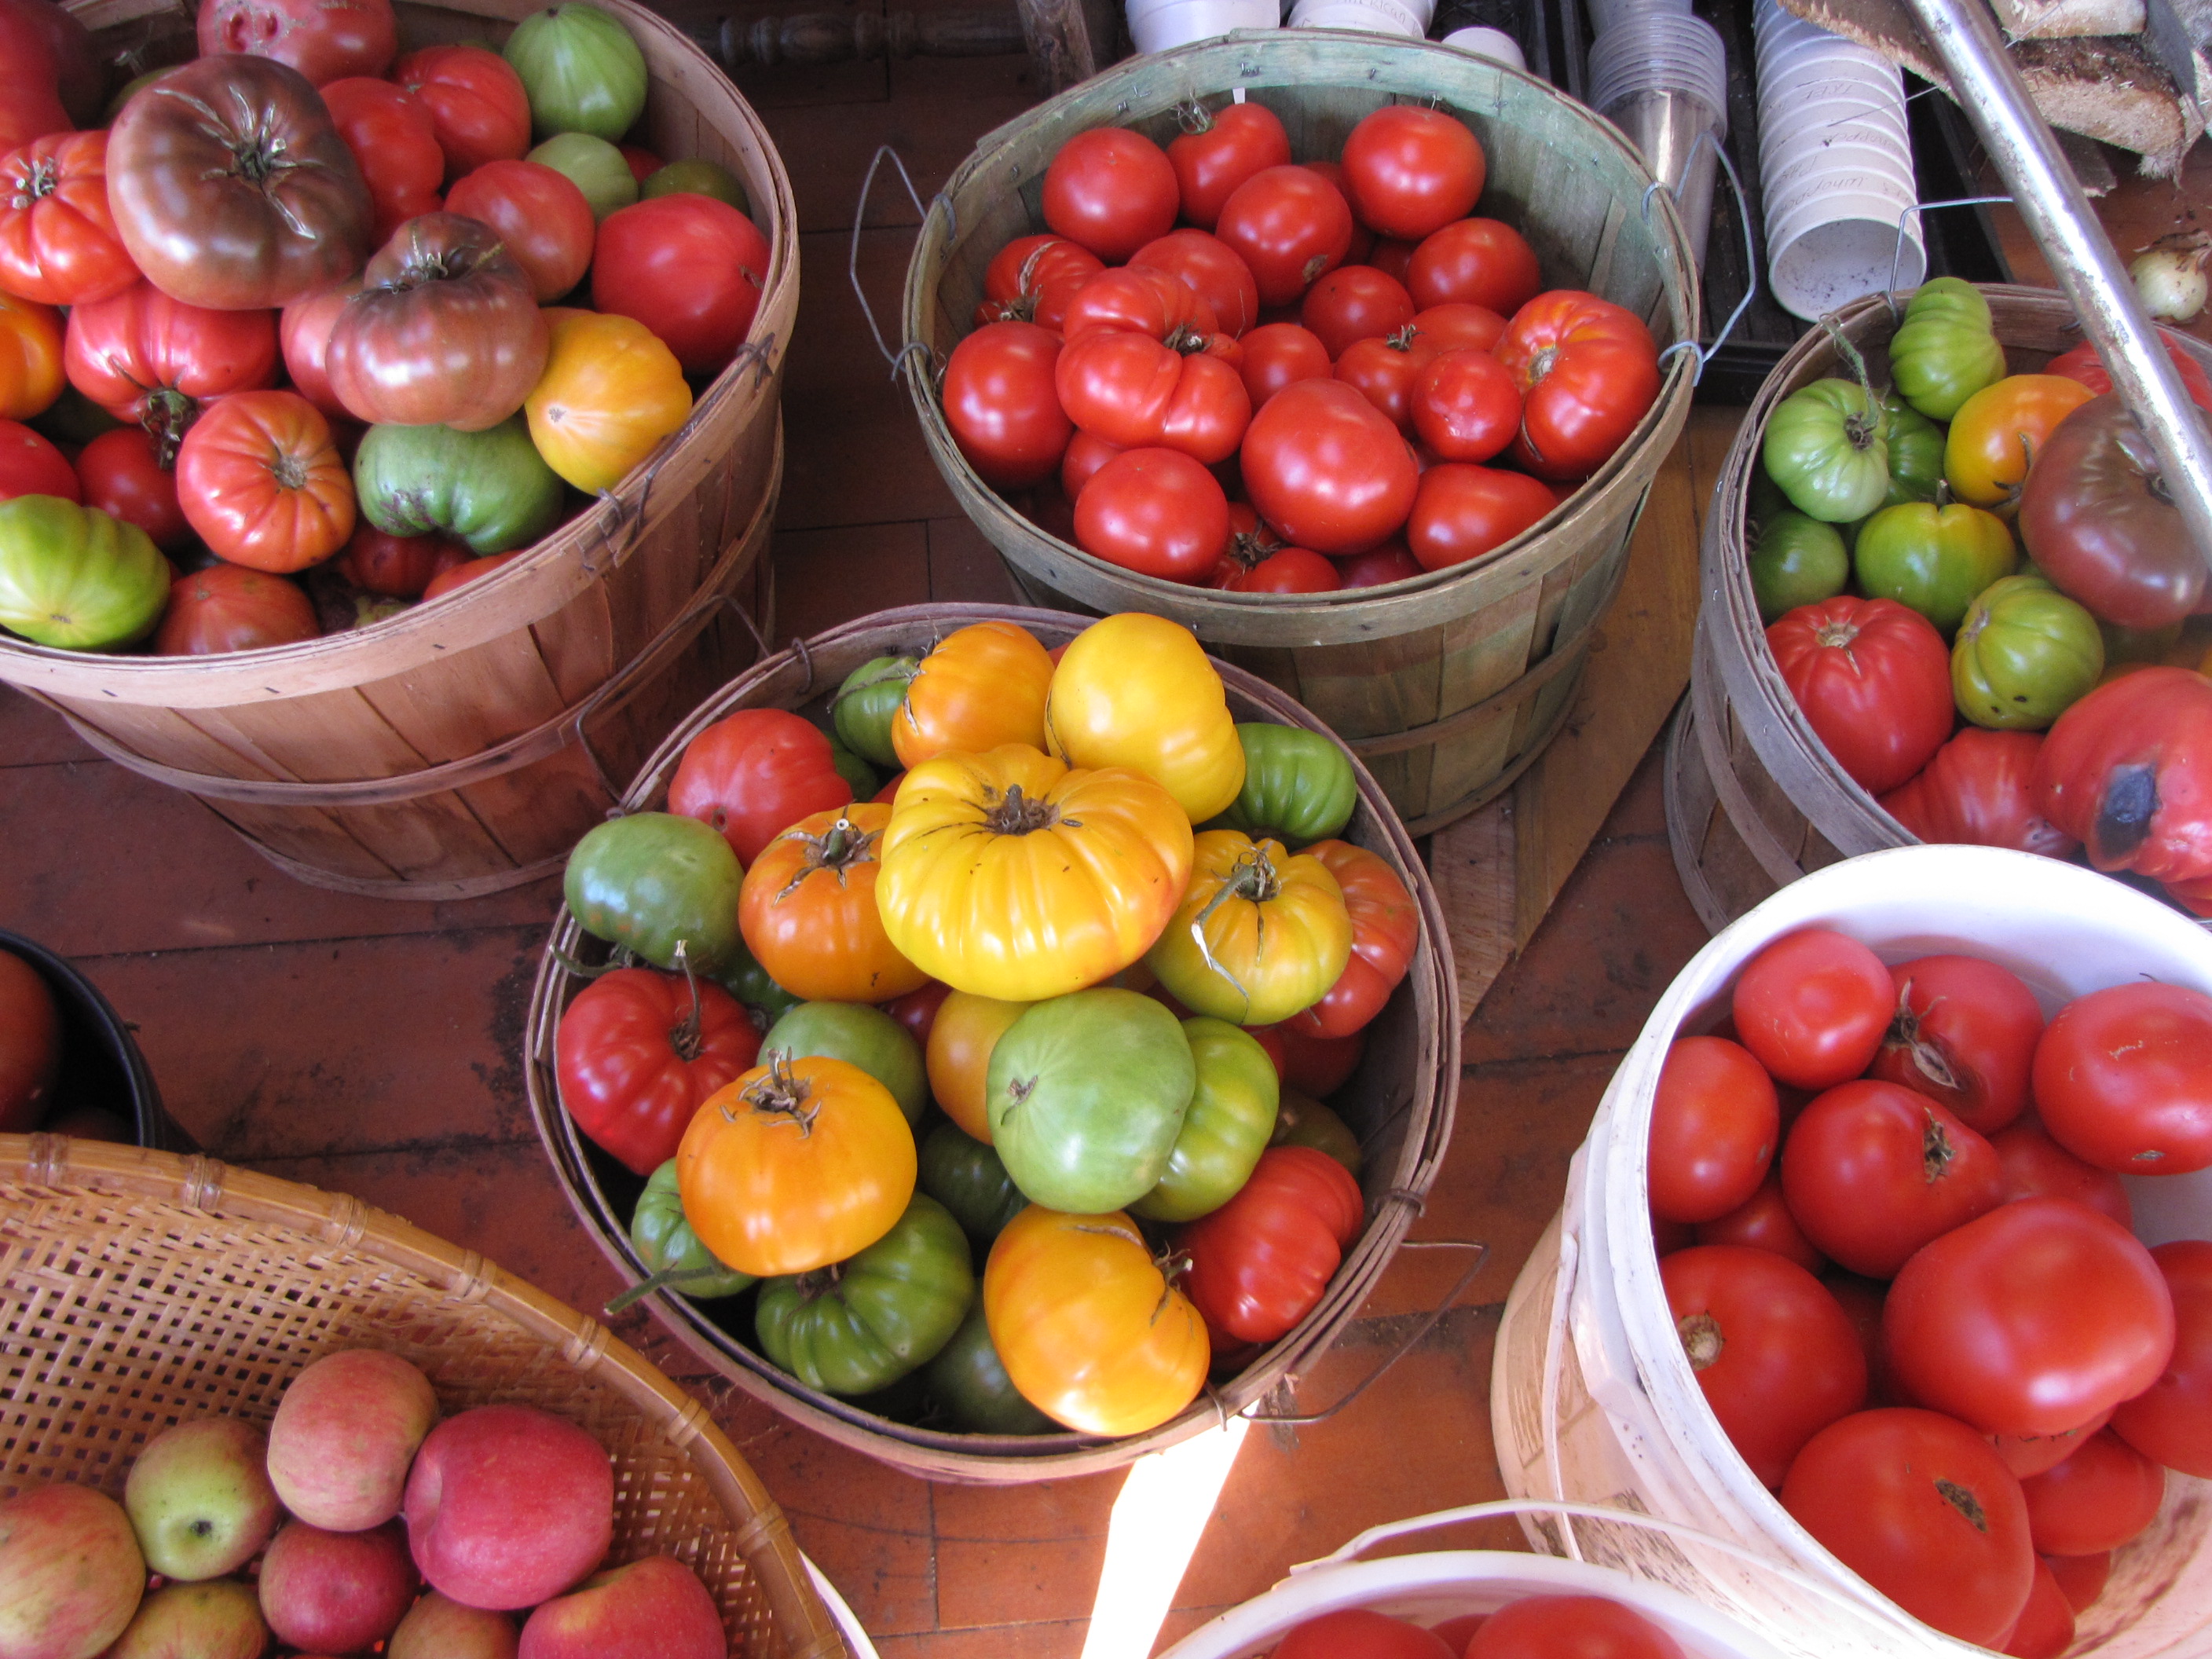 Early Harvest Tomatoes: Get Delicious Produce from Early Wonder, Arctic Rose & More - Tomato Growers Supply's Varieties Ranked Best for Taste & Heat Resistance